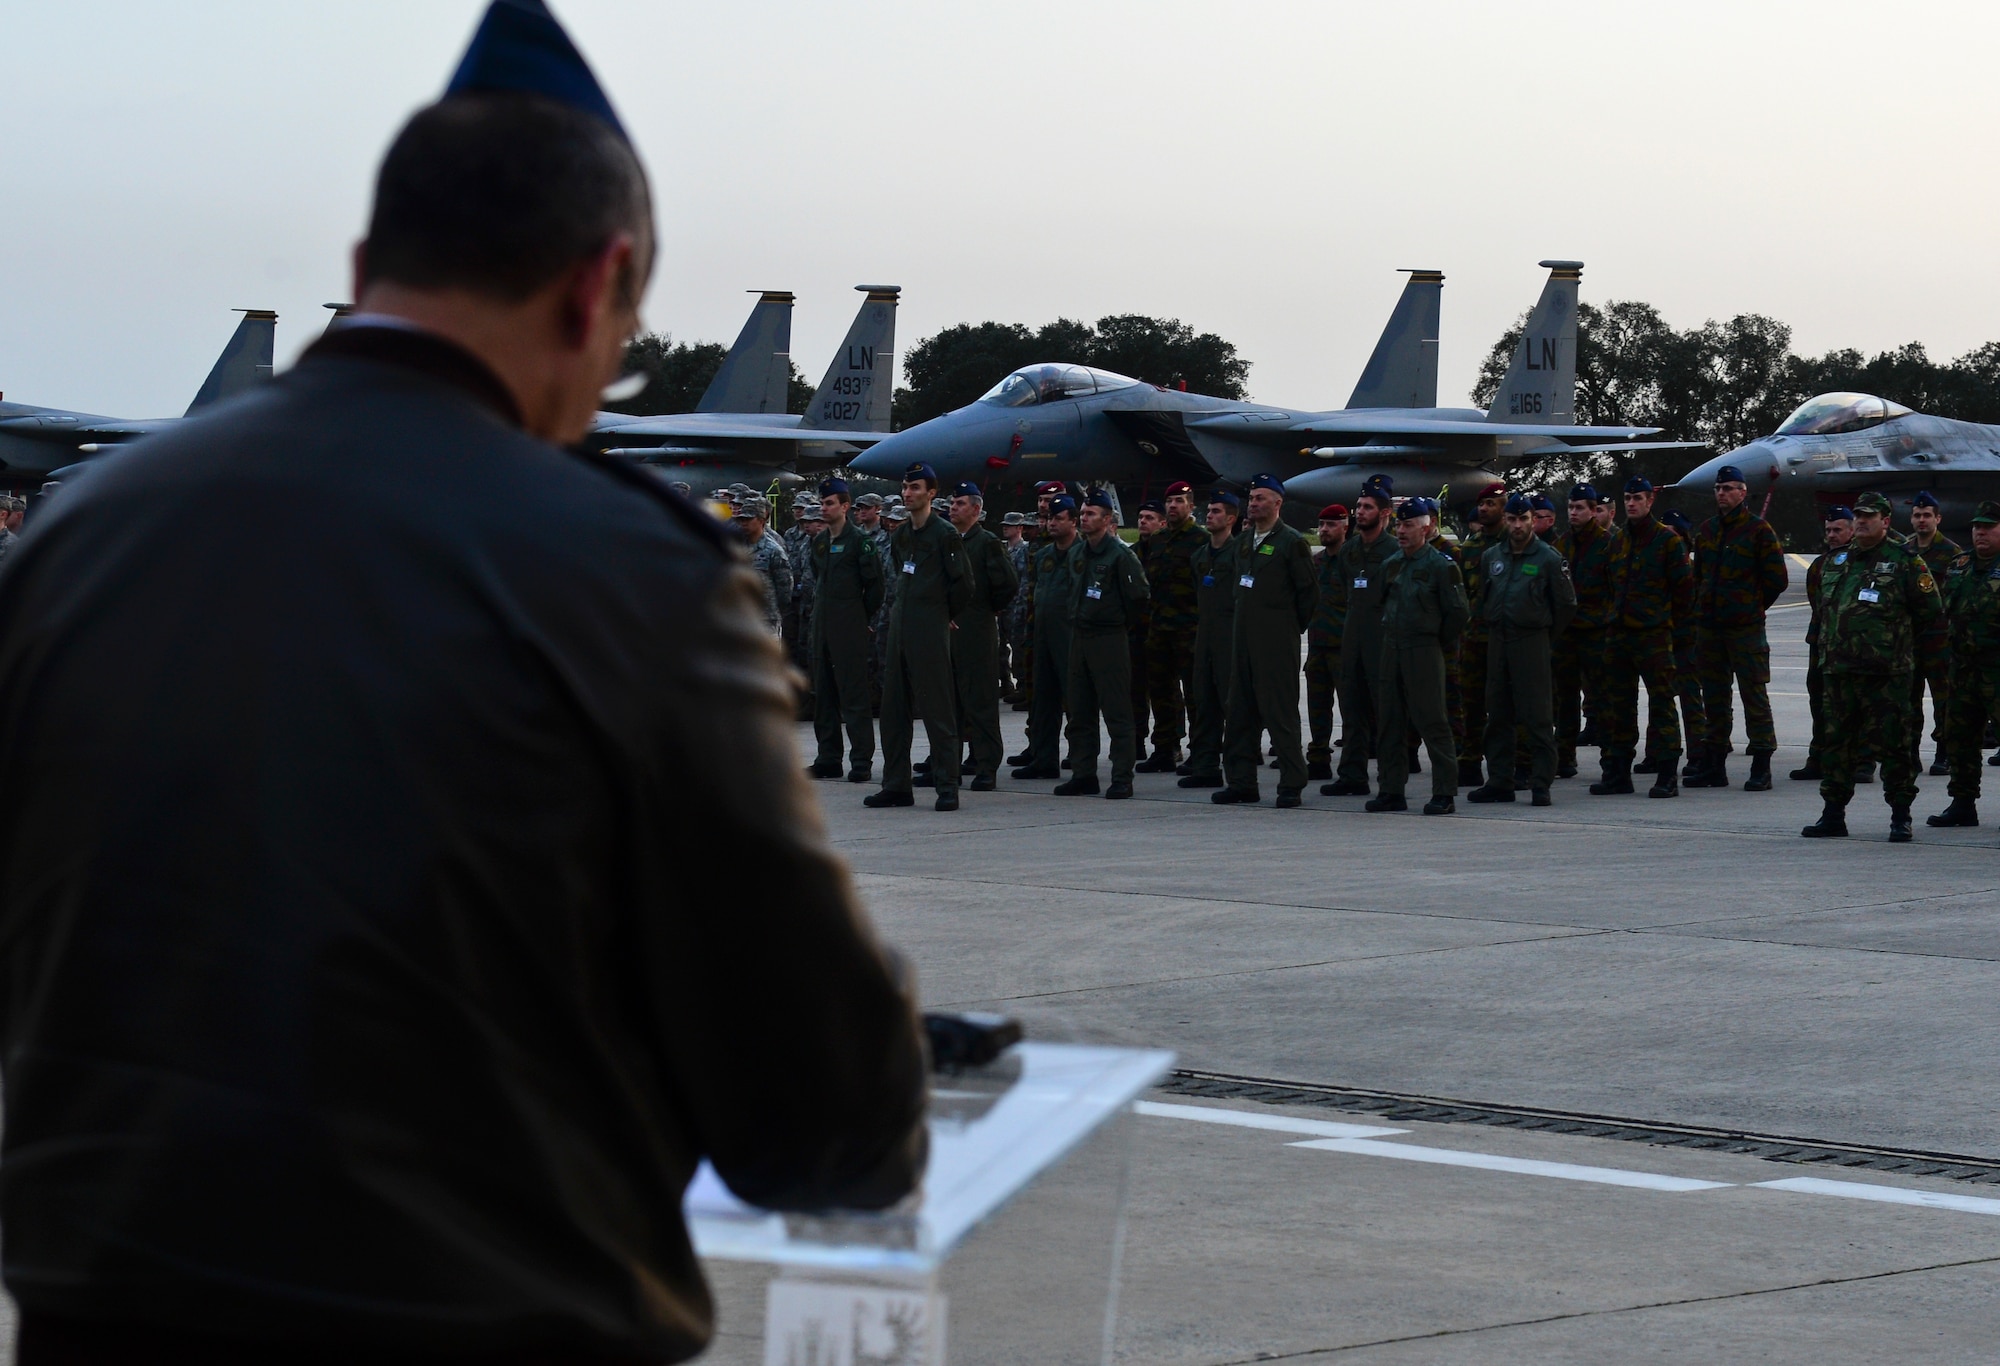 Brig. Gen. Barros Ferreira, Portuguese air force director of operations, speaks to U.S. Airmen as well as NATO and other ally forces during the opening ceremony for Real Thaw 2016 at Beja Air Base, Portugal, Feb. 21, 2016. RT16, taking place from February 22-March 3, is an exercise planned and conducted by the Portuguese air force, under the aegis of its Air Command, who are responsible for training and readying the operational units, through air operations in the defense of national interests, as well as through the participation in military operations in several international cooperation frameworks.  (U.S. Air Force photo by Senior Airman Dawn M. Weber/Released)